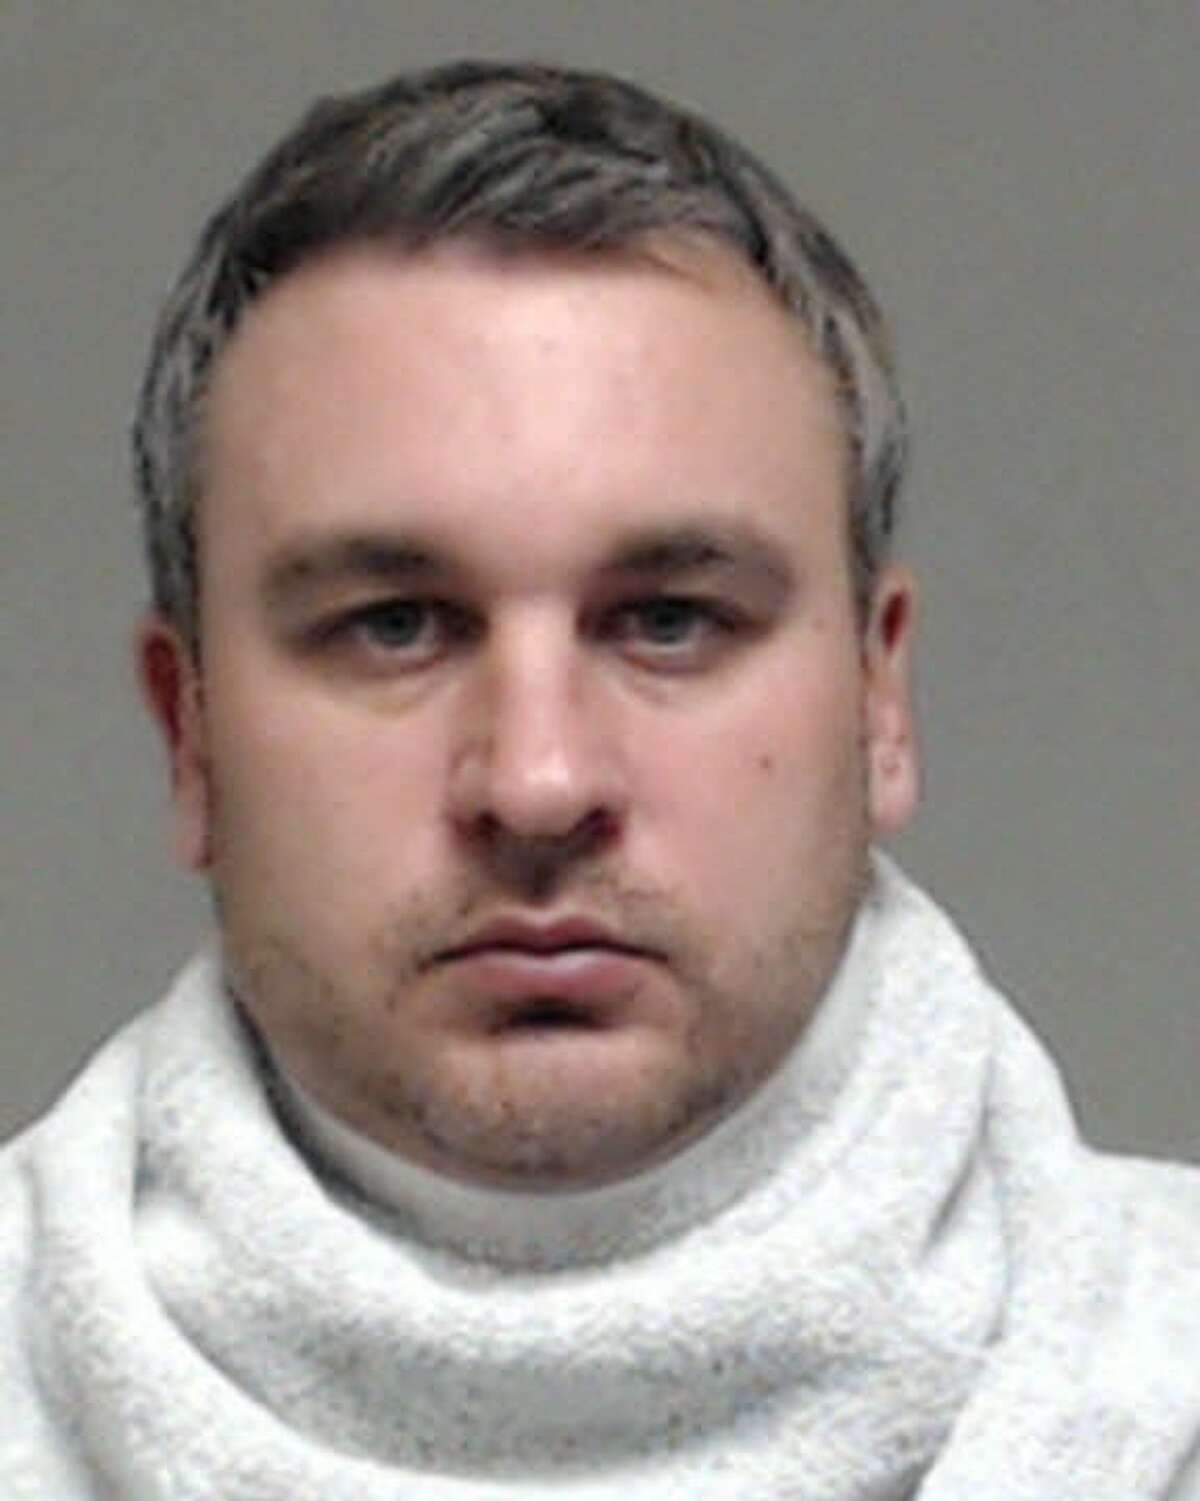 Charles Kyle Adcock, 31, pleaded not guilty in February 2015 in an Alabama court to 12 counts of first-degree rape, nine counts of second-degree sodomy and eight counts of second-degree rape. The charges stem from his alleged sexual abuse of a 14-year-old girl while serving at Woodward Avenue Baptist Church in Muscle Shoals, Alabama from 2010-12.